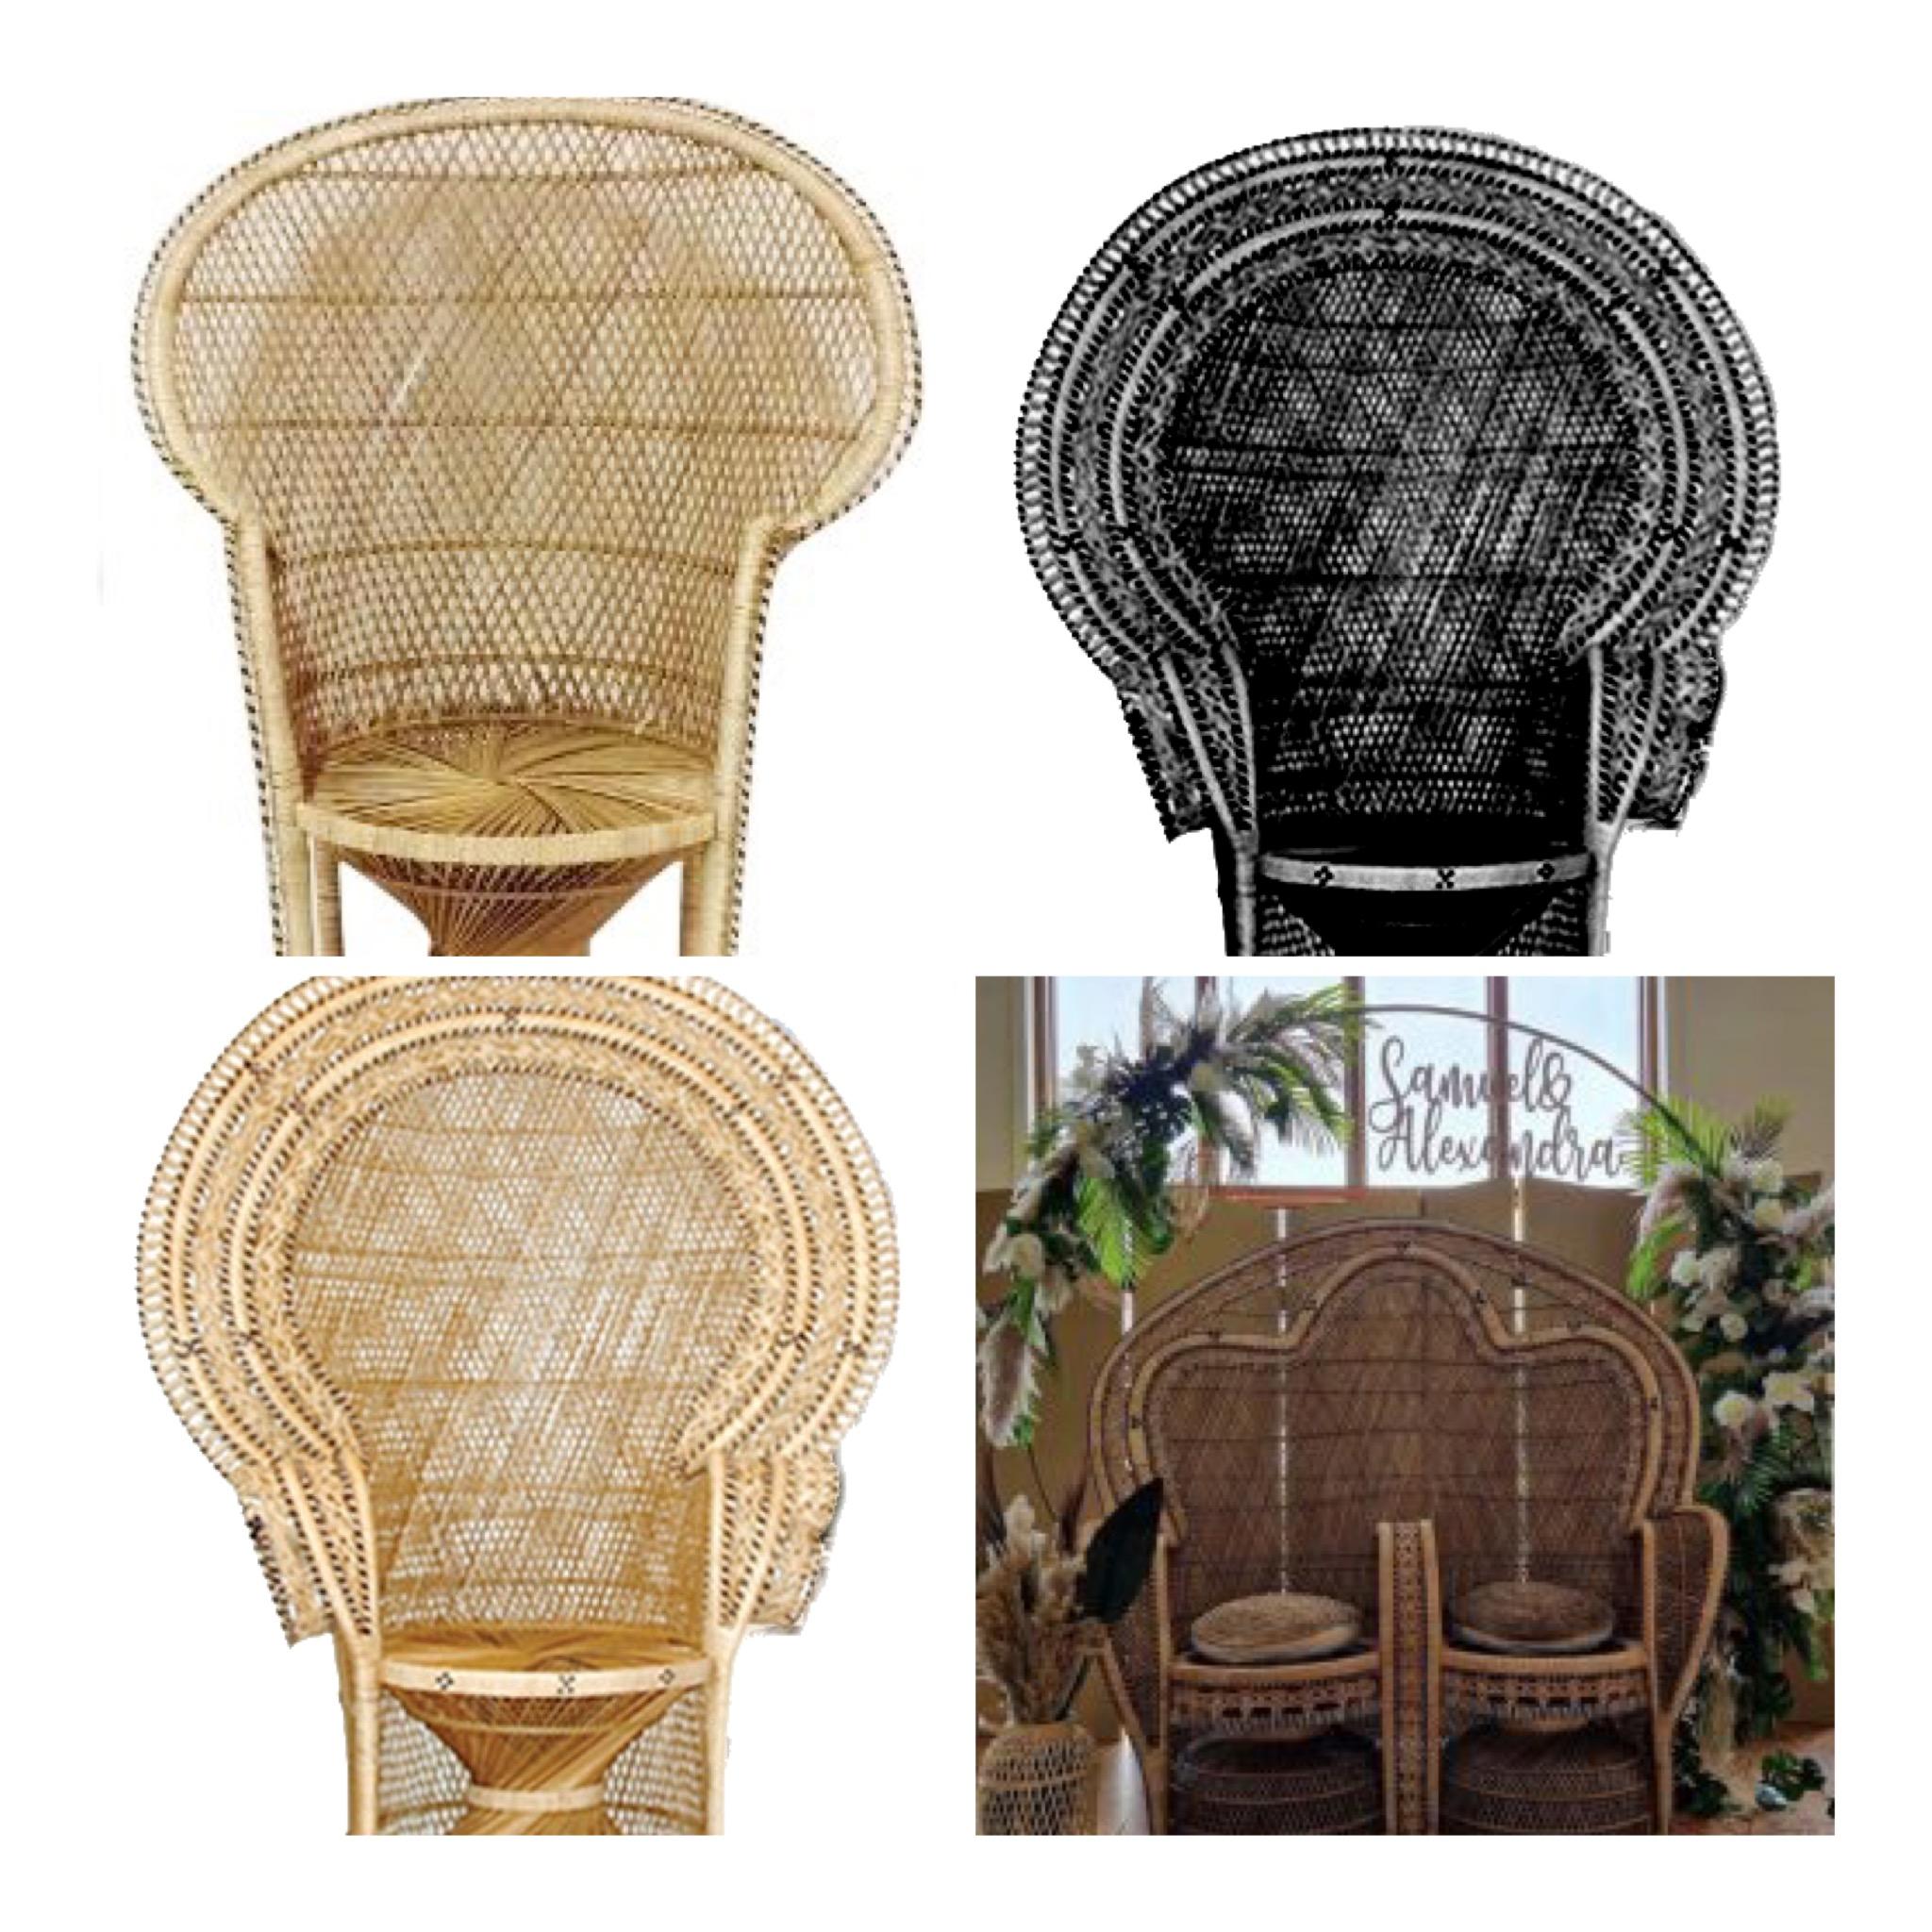 Wicker Peacock Chairs